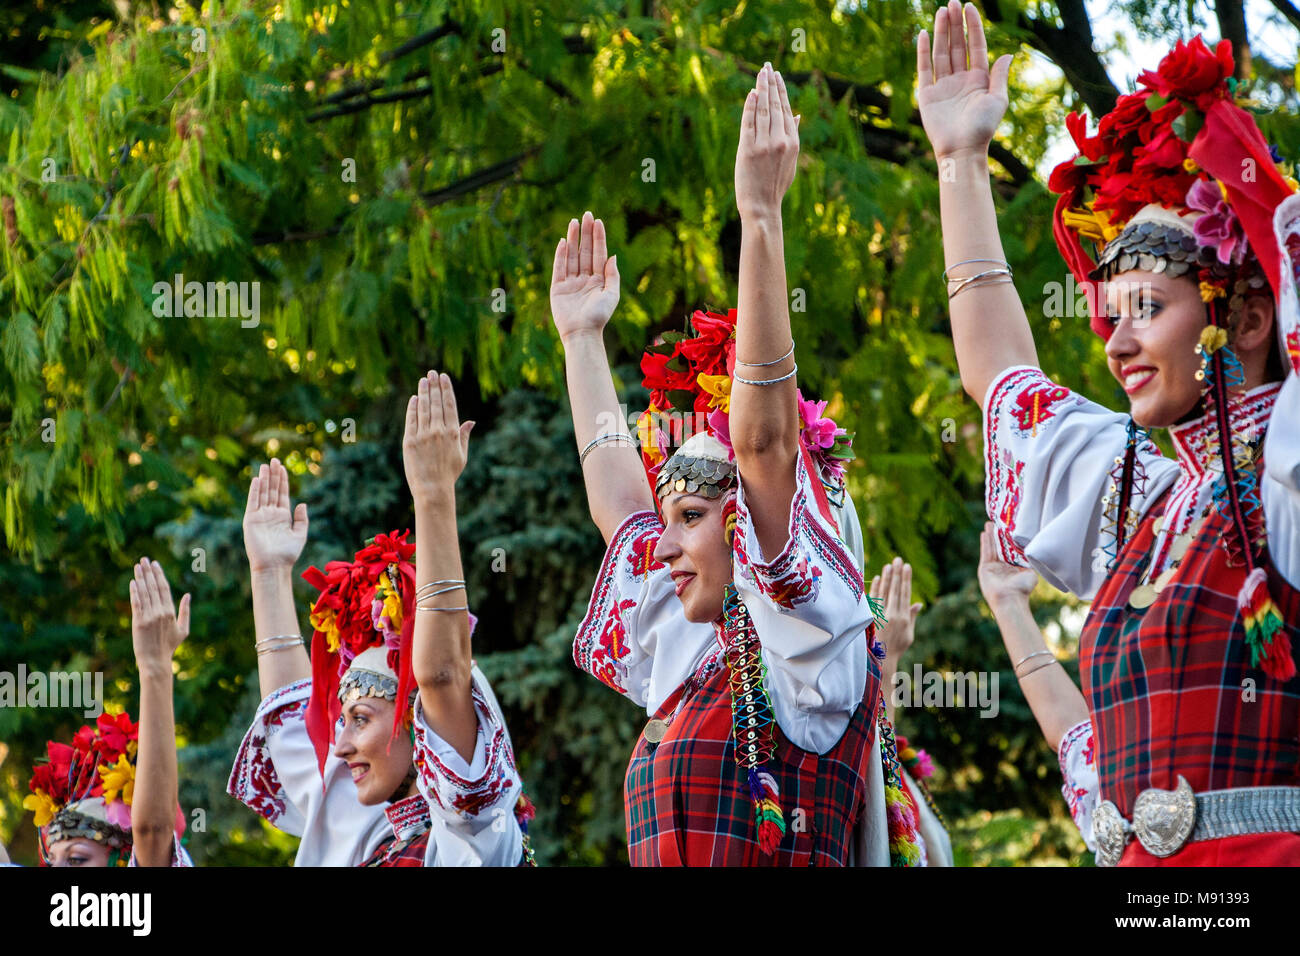 Plovdiv, Bulgaria 3rd August 2013: Beautiful Bulgarian women dancers performing on stage of the XIX International Folklore Festival. Stock Photo